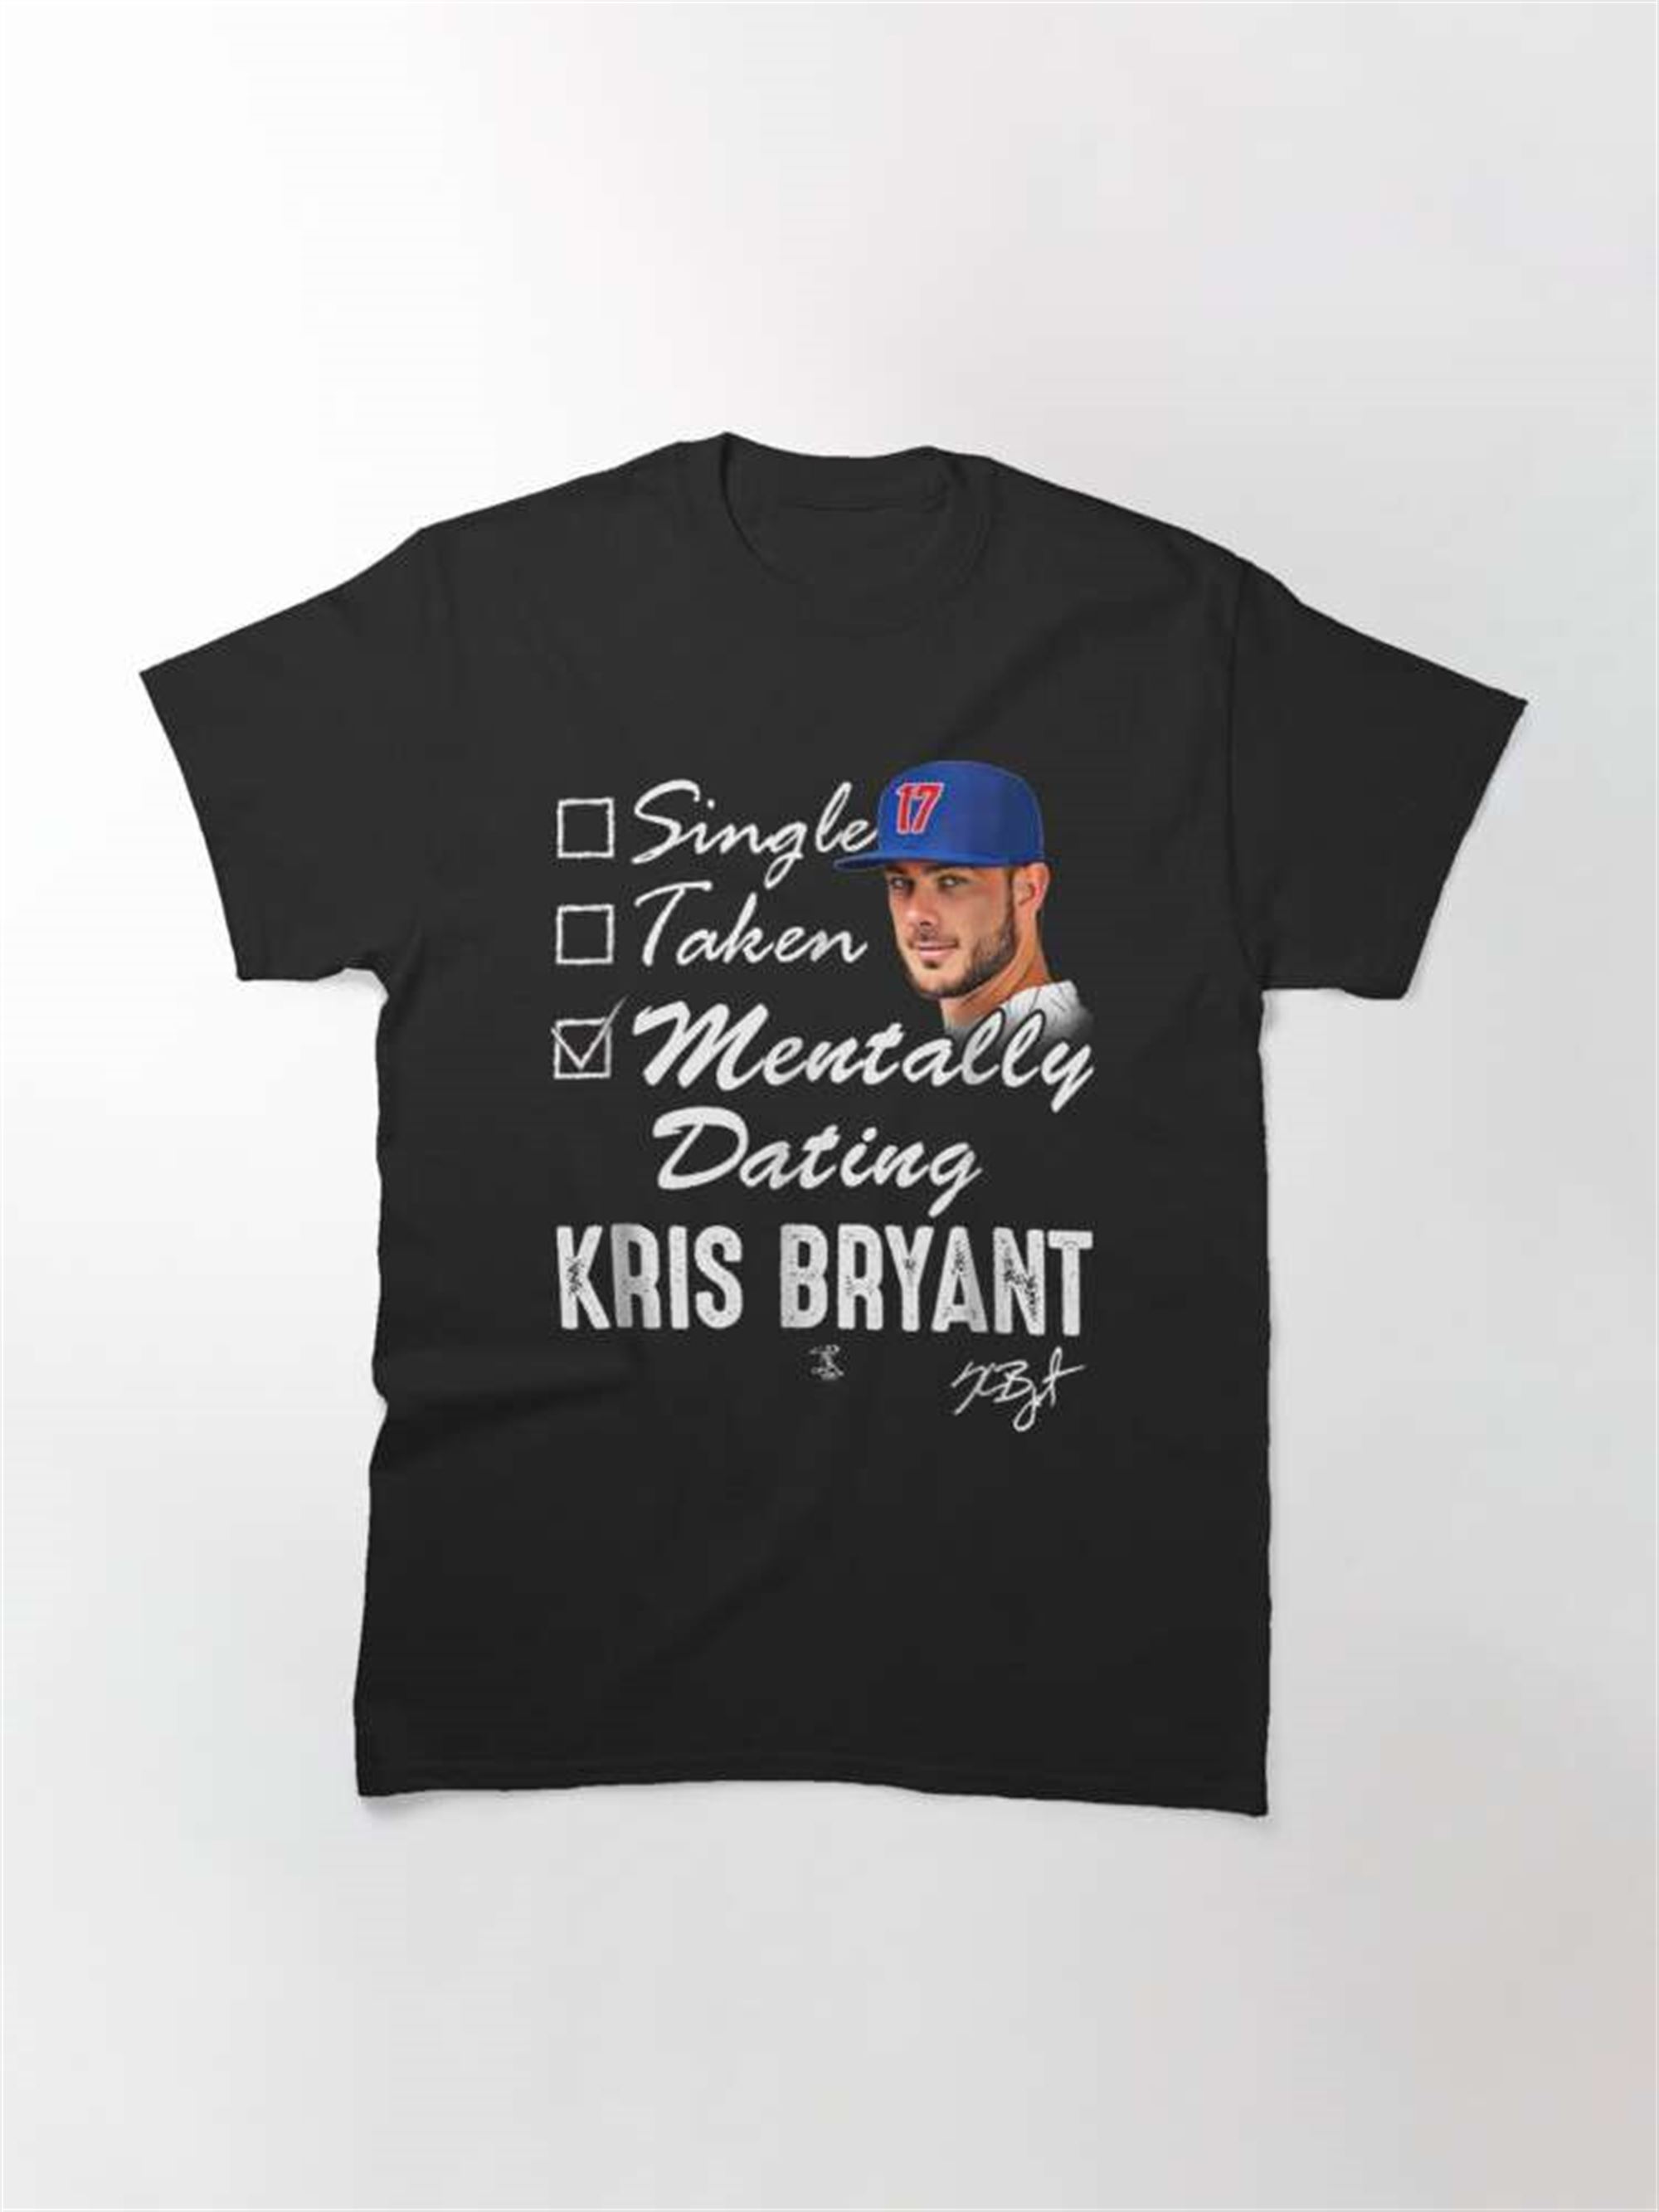 Kris Bryant Mentally Dating Unisex T Shirt Full Size Up To 5xl